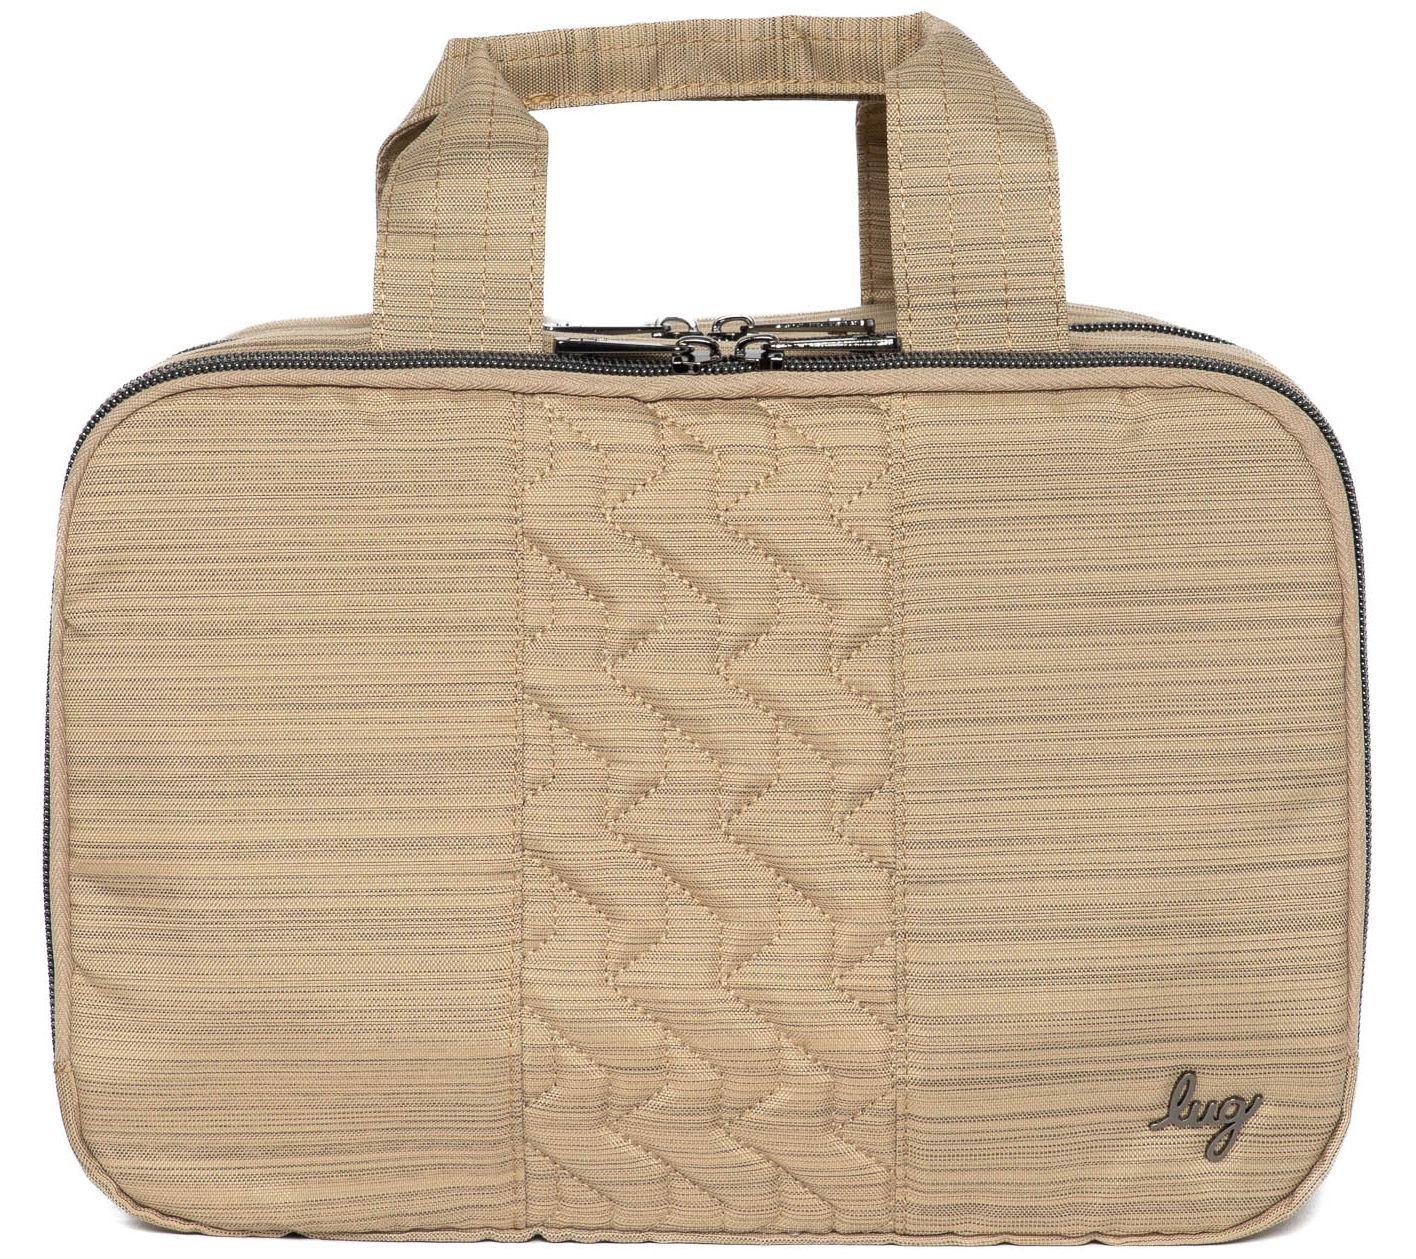 Lug Quilted Cosmetic Case w/ Top Handle - Flatbed Deluxe 